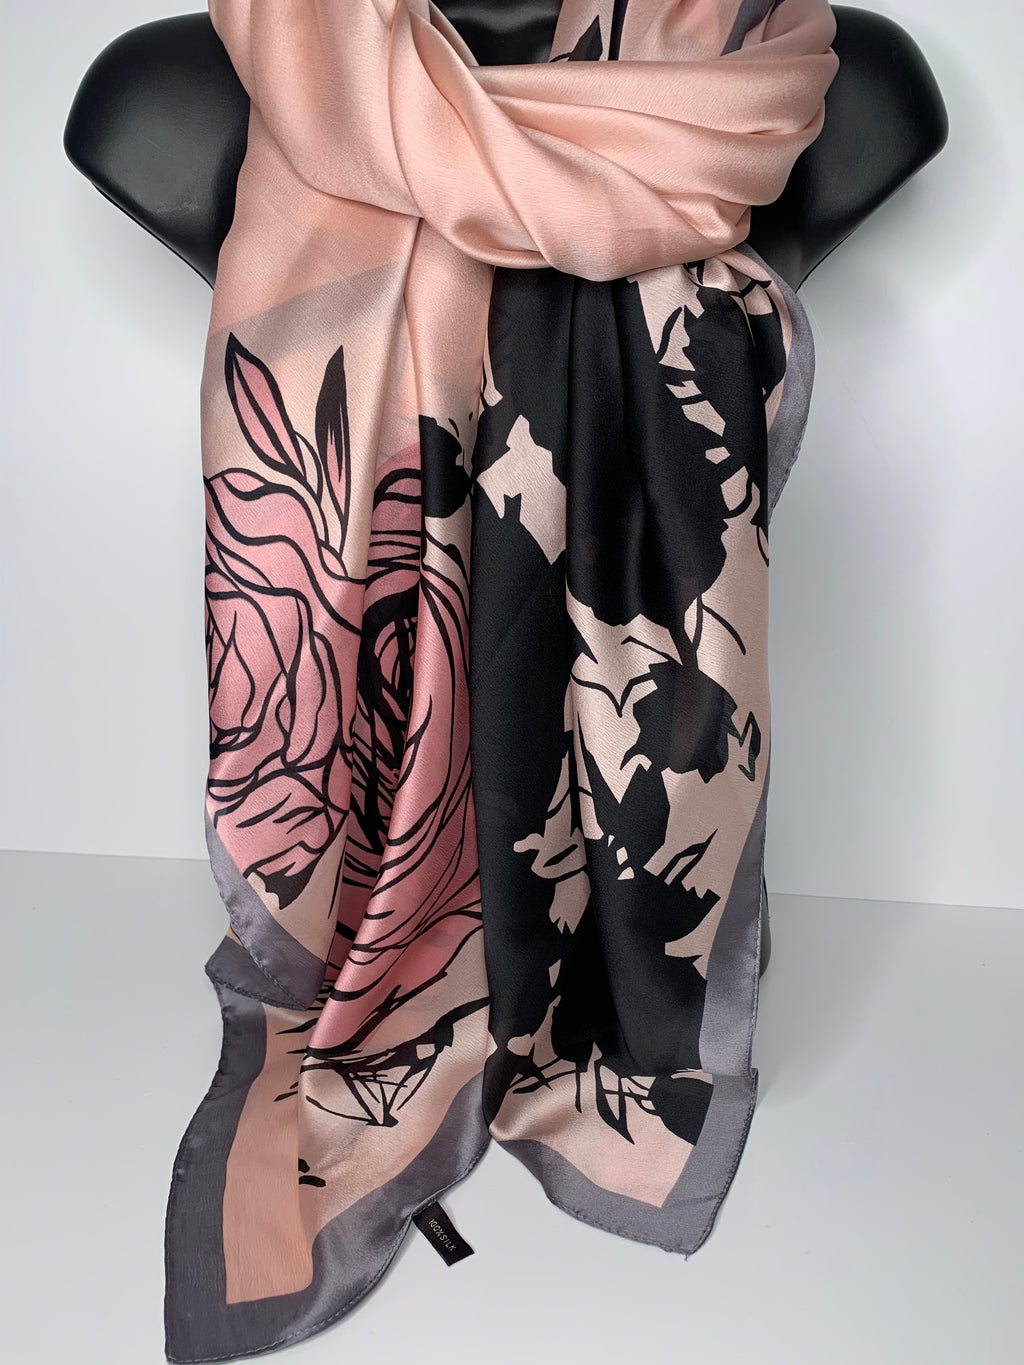 100% silk luxurious rose print scarf in shades of black, pink and grey